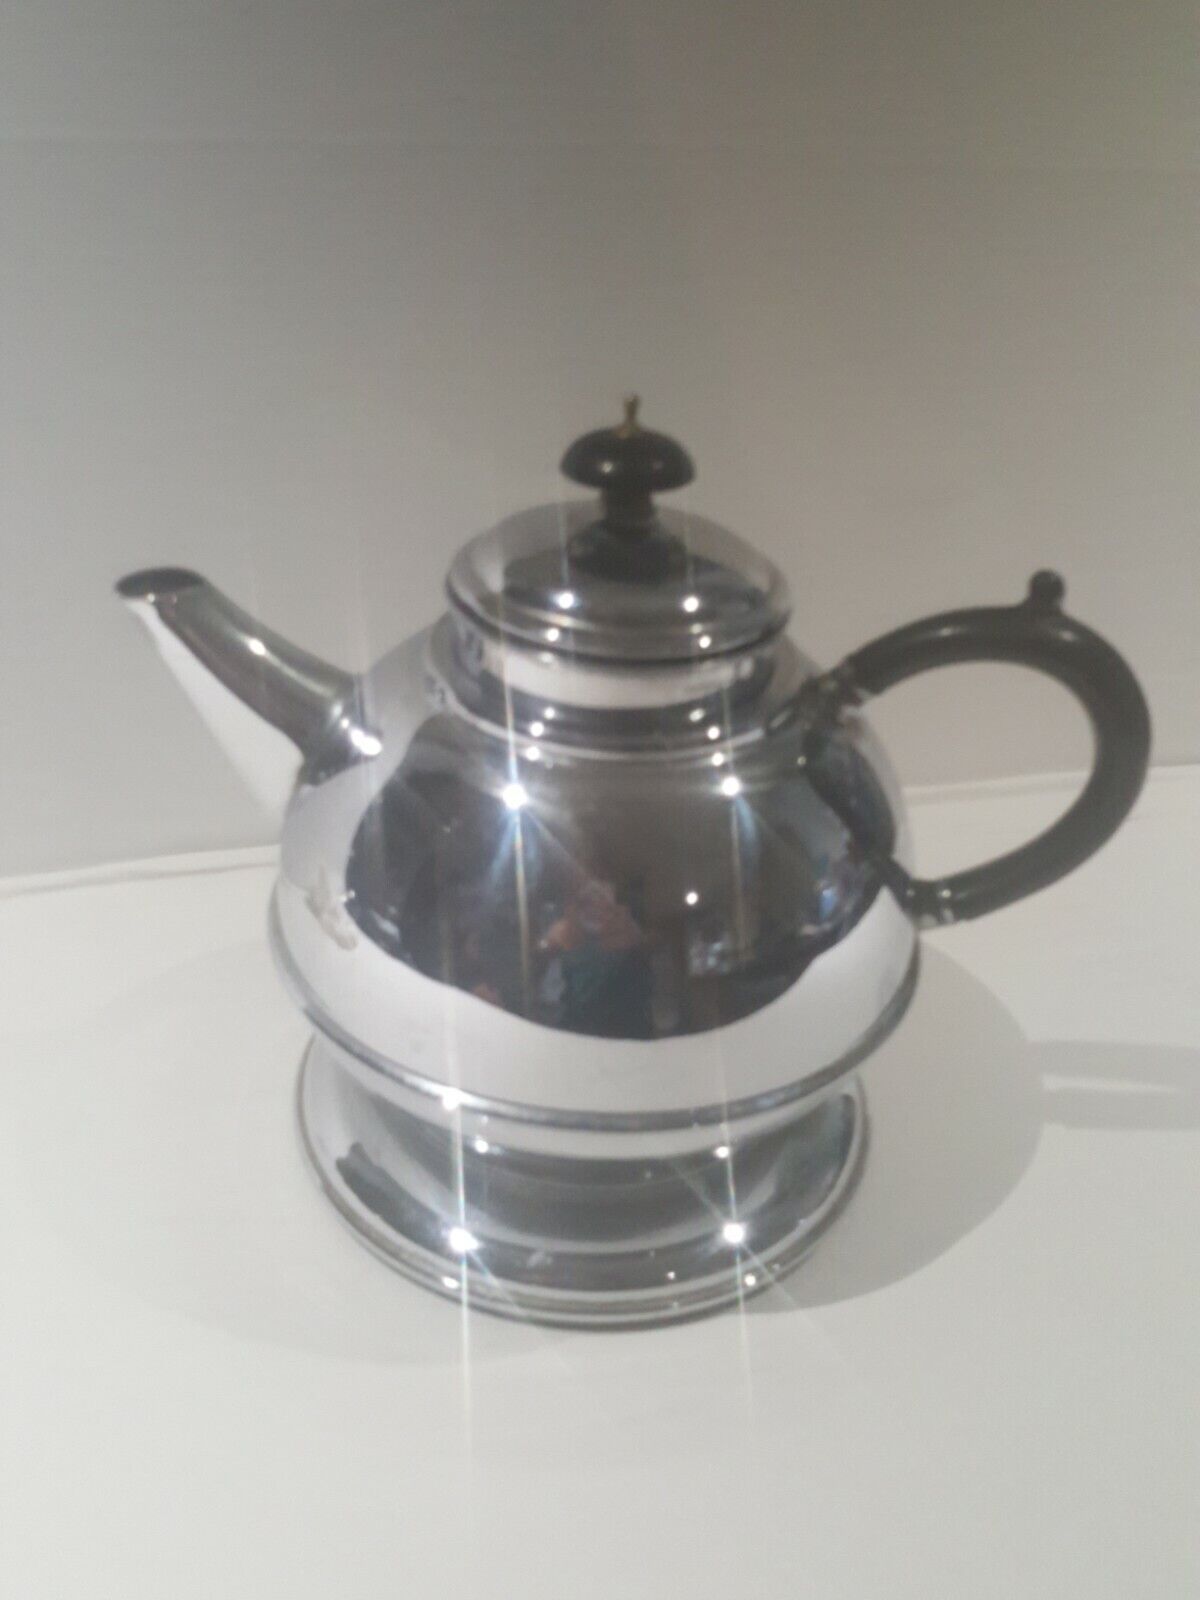 Antique Valuations: Vintage Teapot with Removable Strainer - Bakelite Handle - 2½ Pint - 'Master'